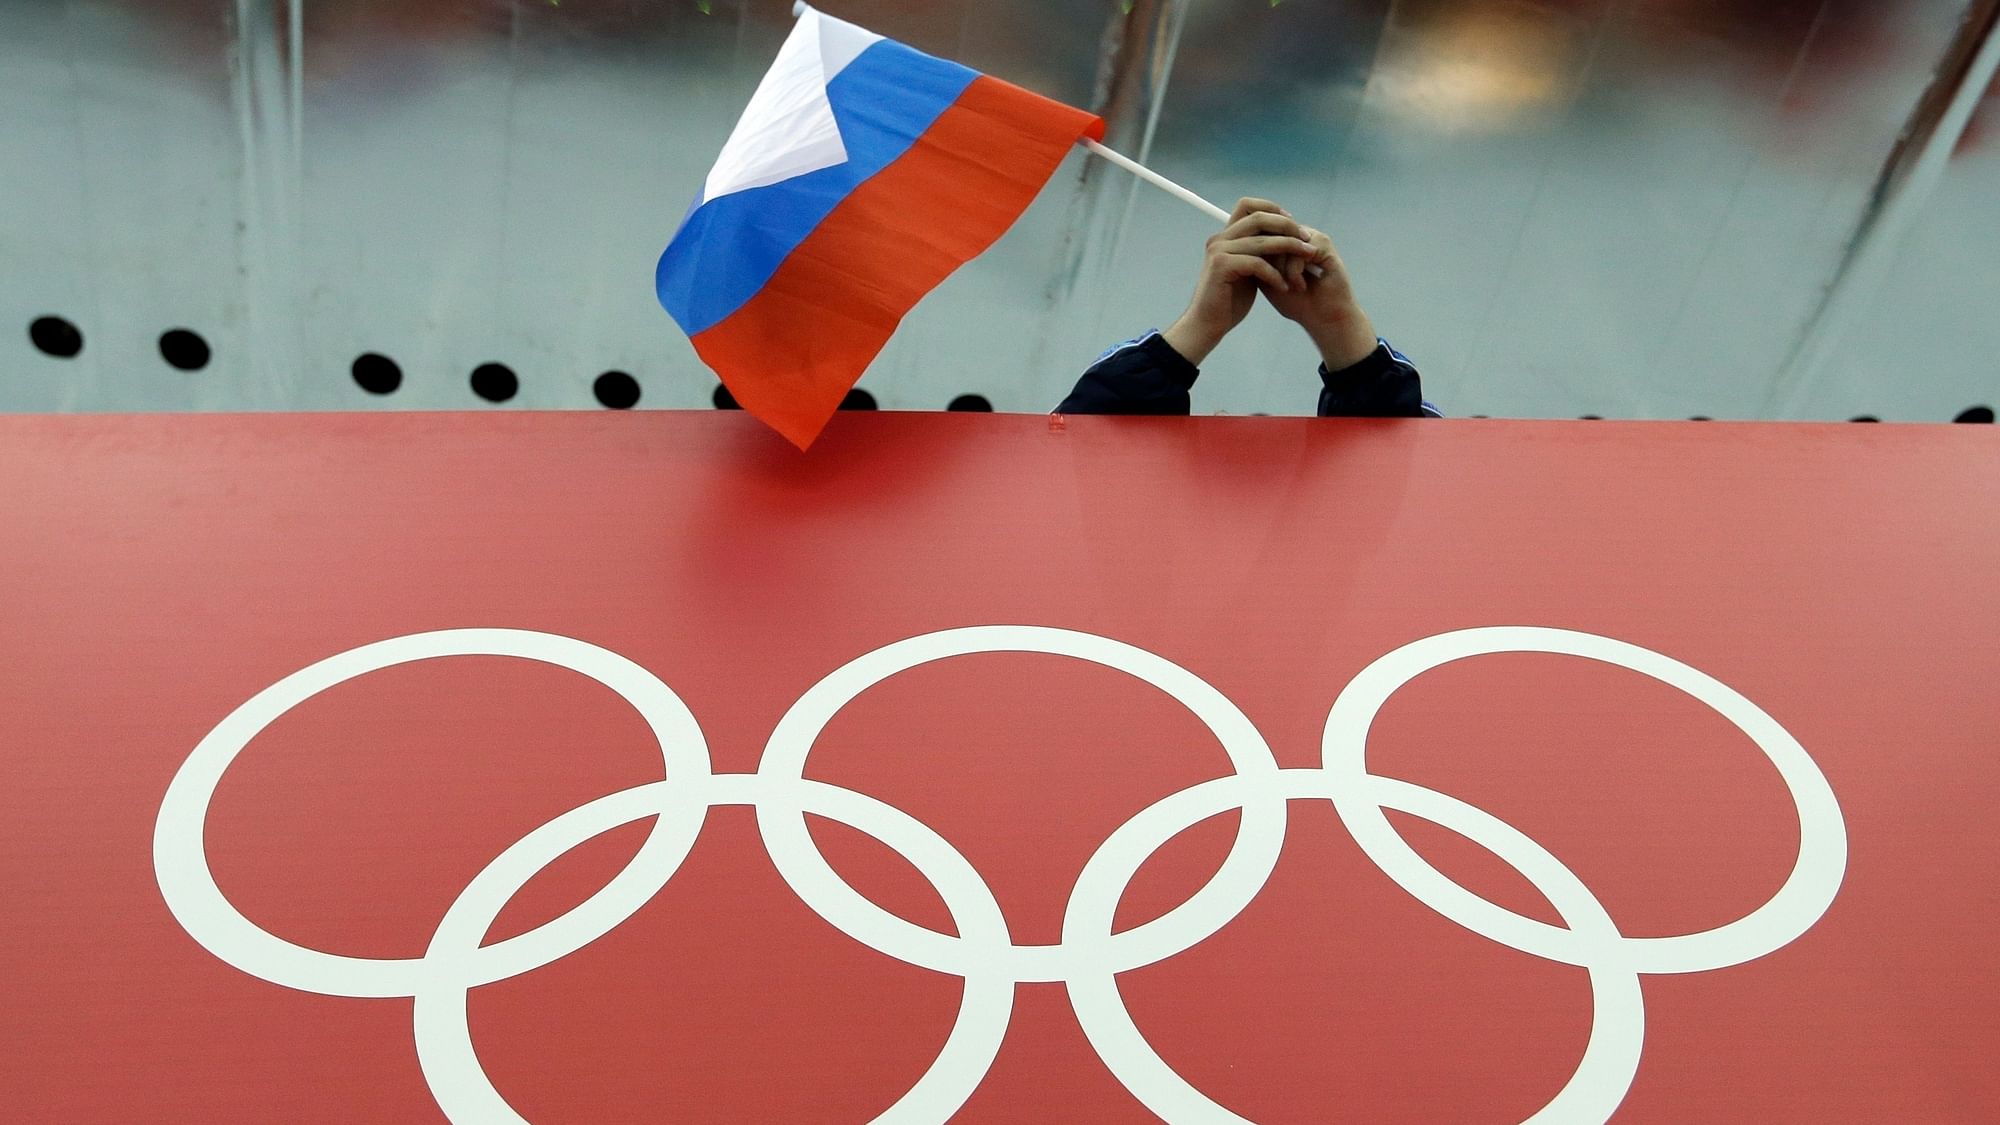 RUSADA, the anti-doping agency of Russia, said it’s challenging the ban imposed on the country from major world sports competitions.